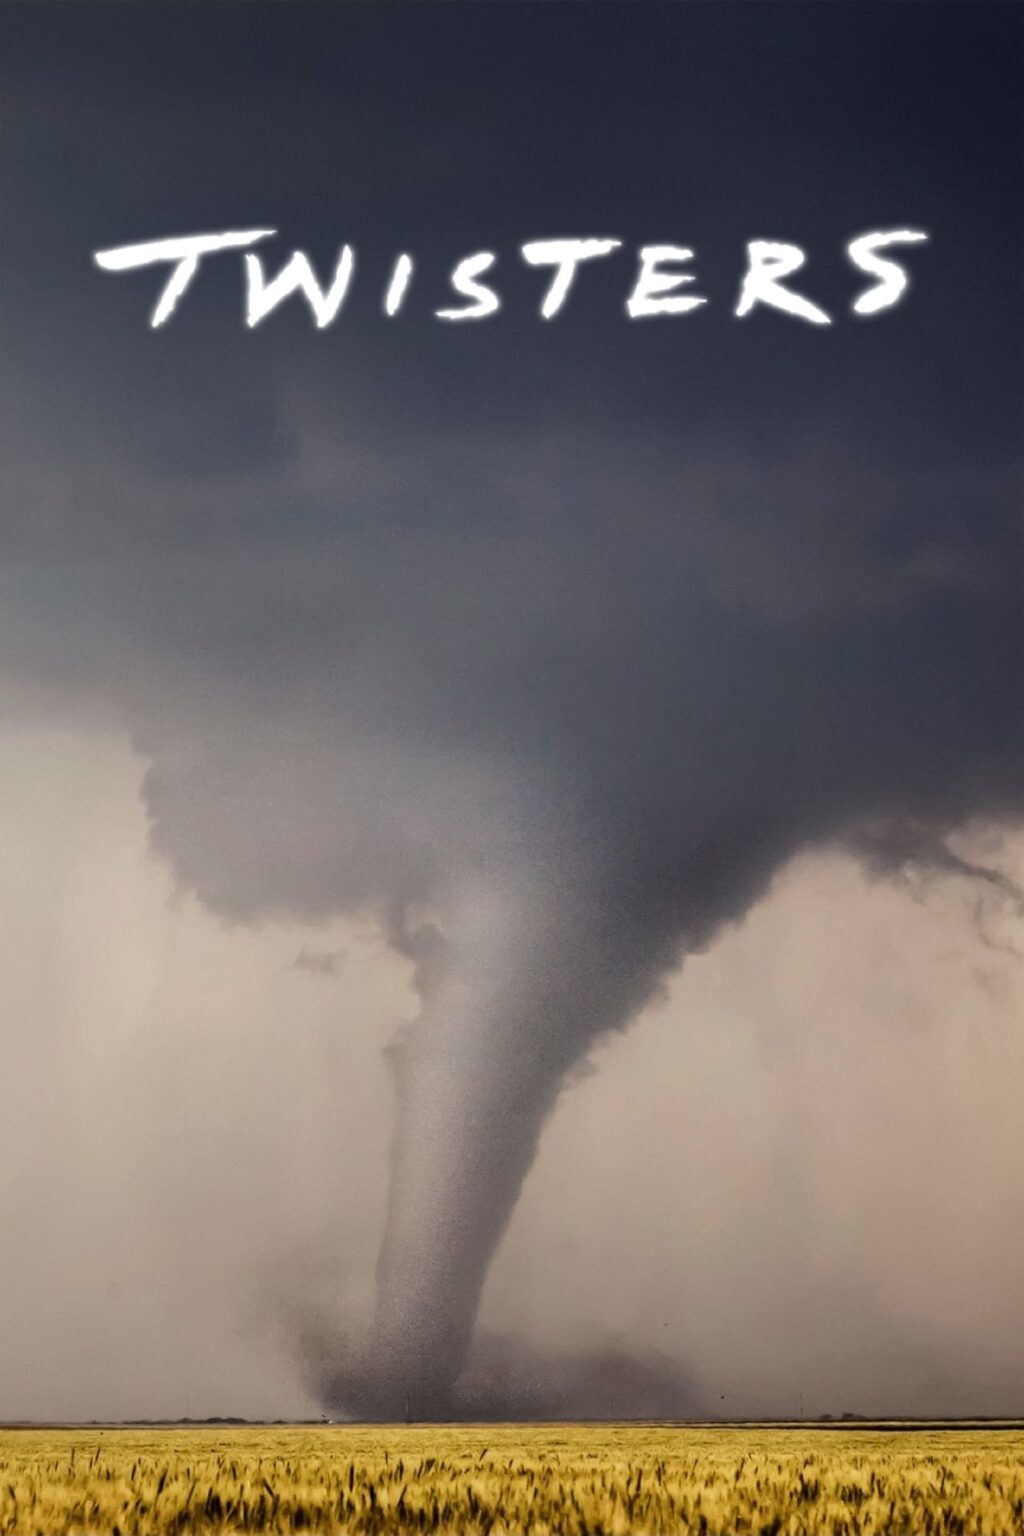 Watch Twisters Full Movie Online For Free In HD